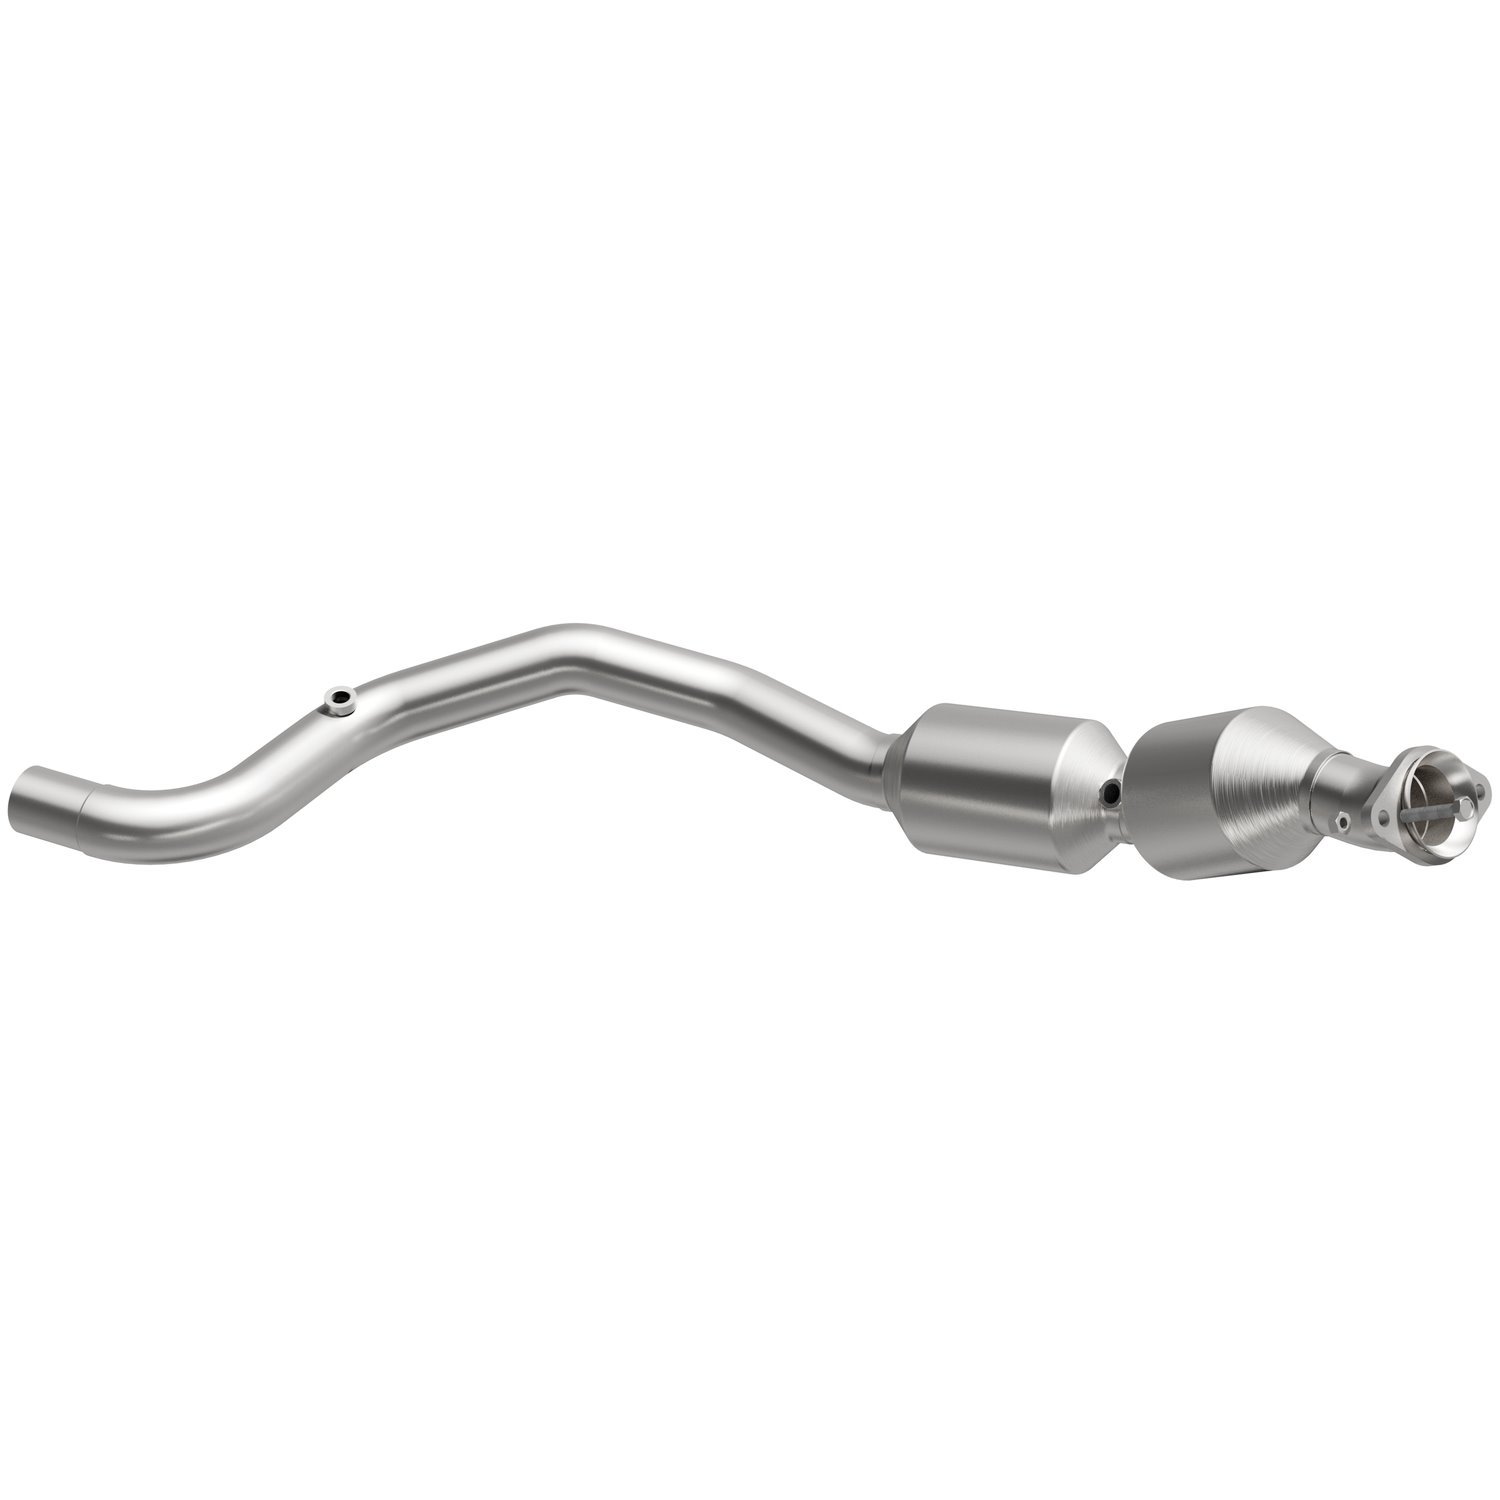 OEM Grade Federal / EPA Compliant Direct-Fit Catalytic Converter 21-535